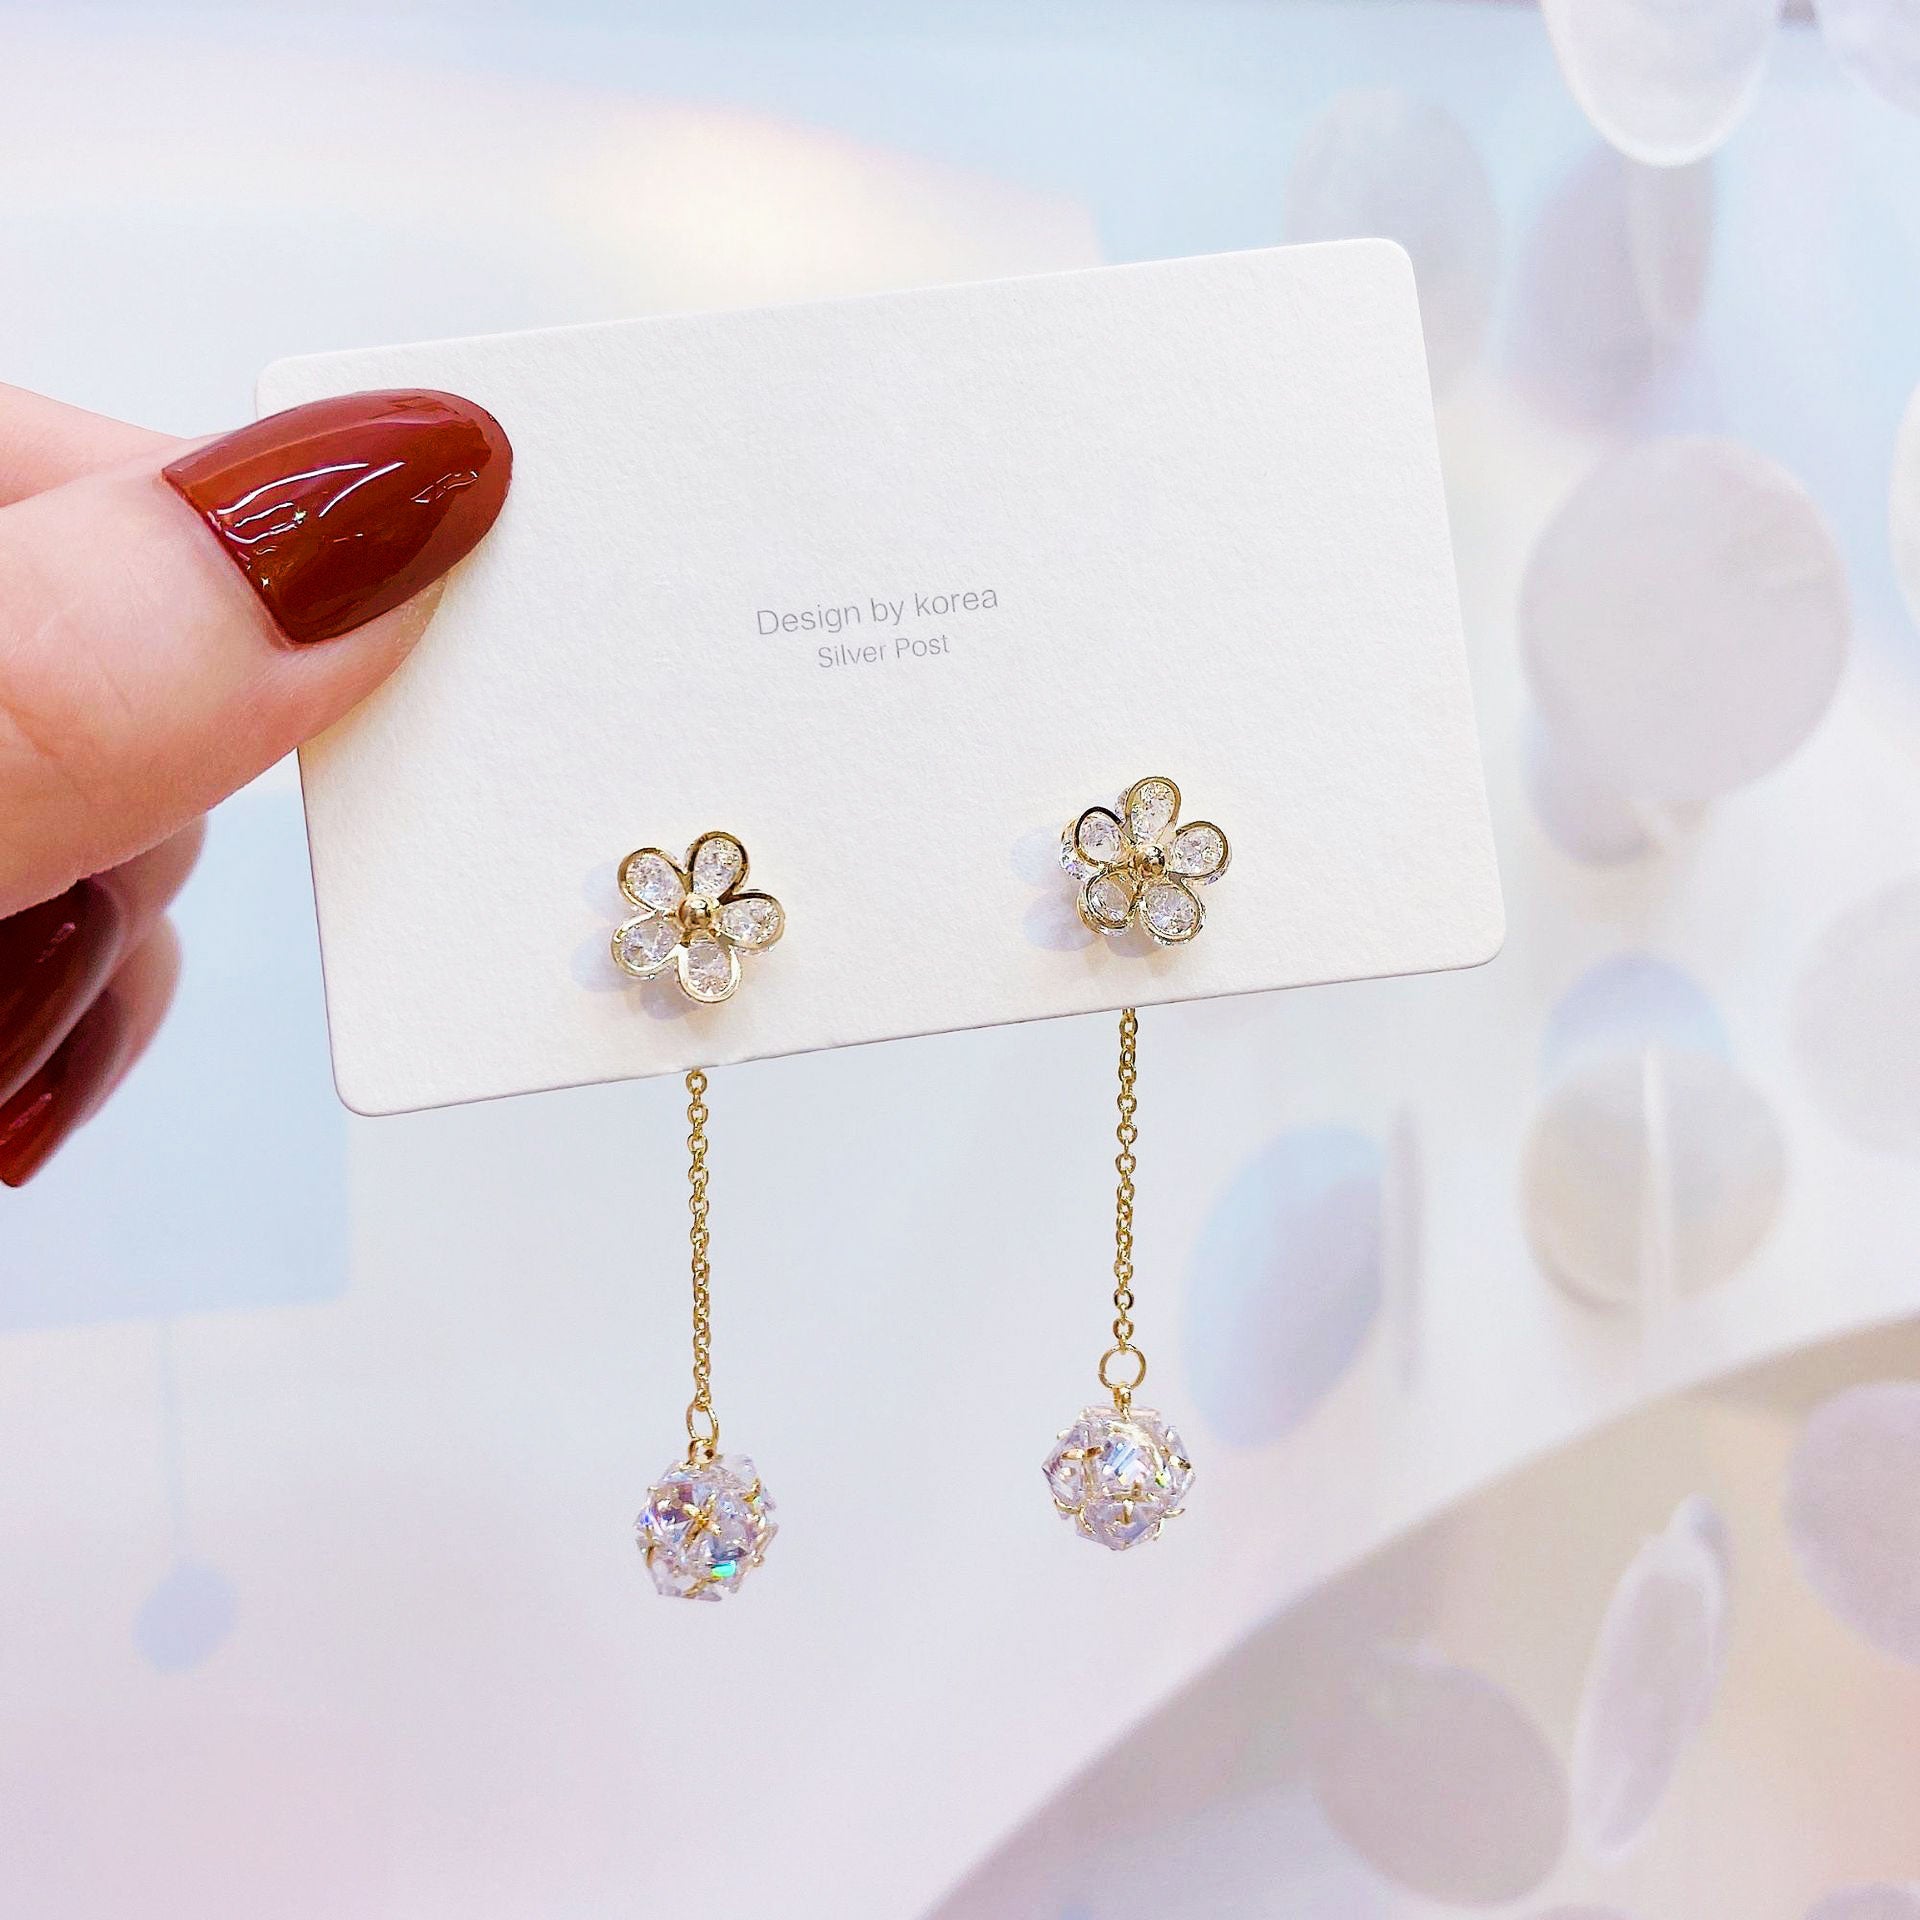 Cz Ear Studs Exquisite Flower Crystal Both  Earrings